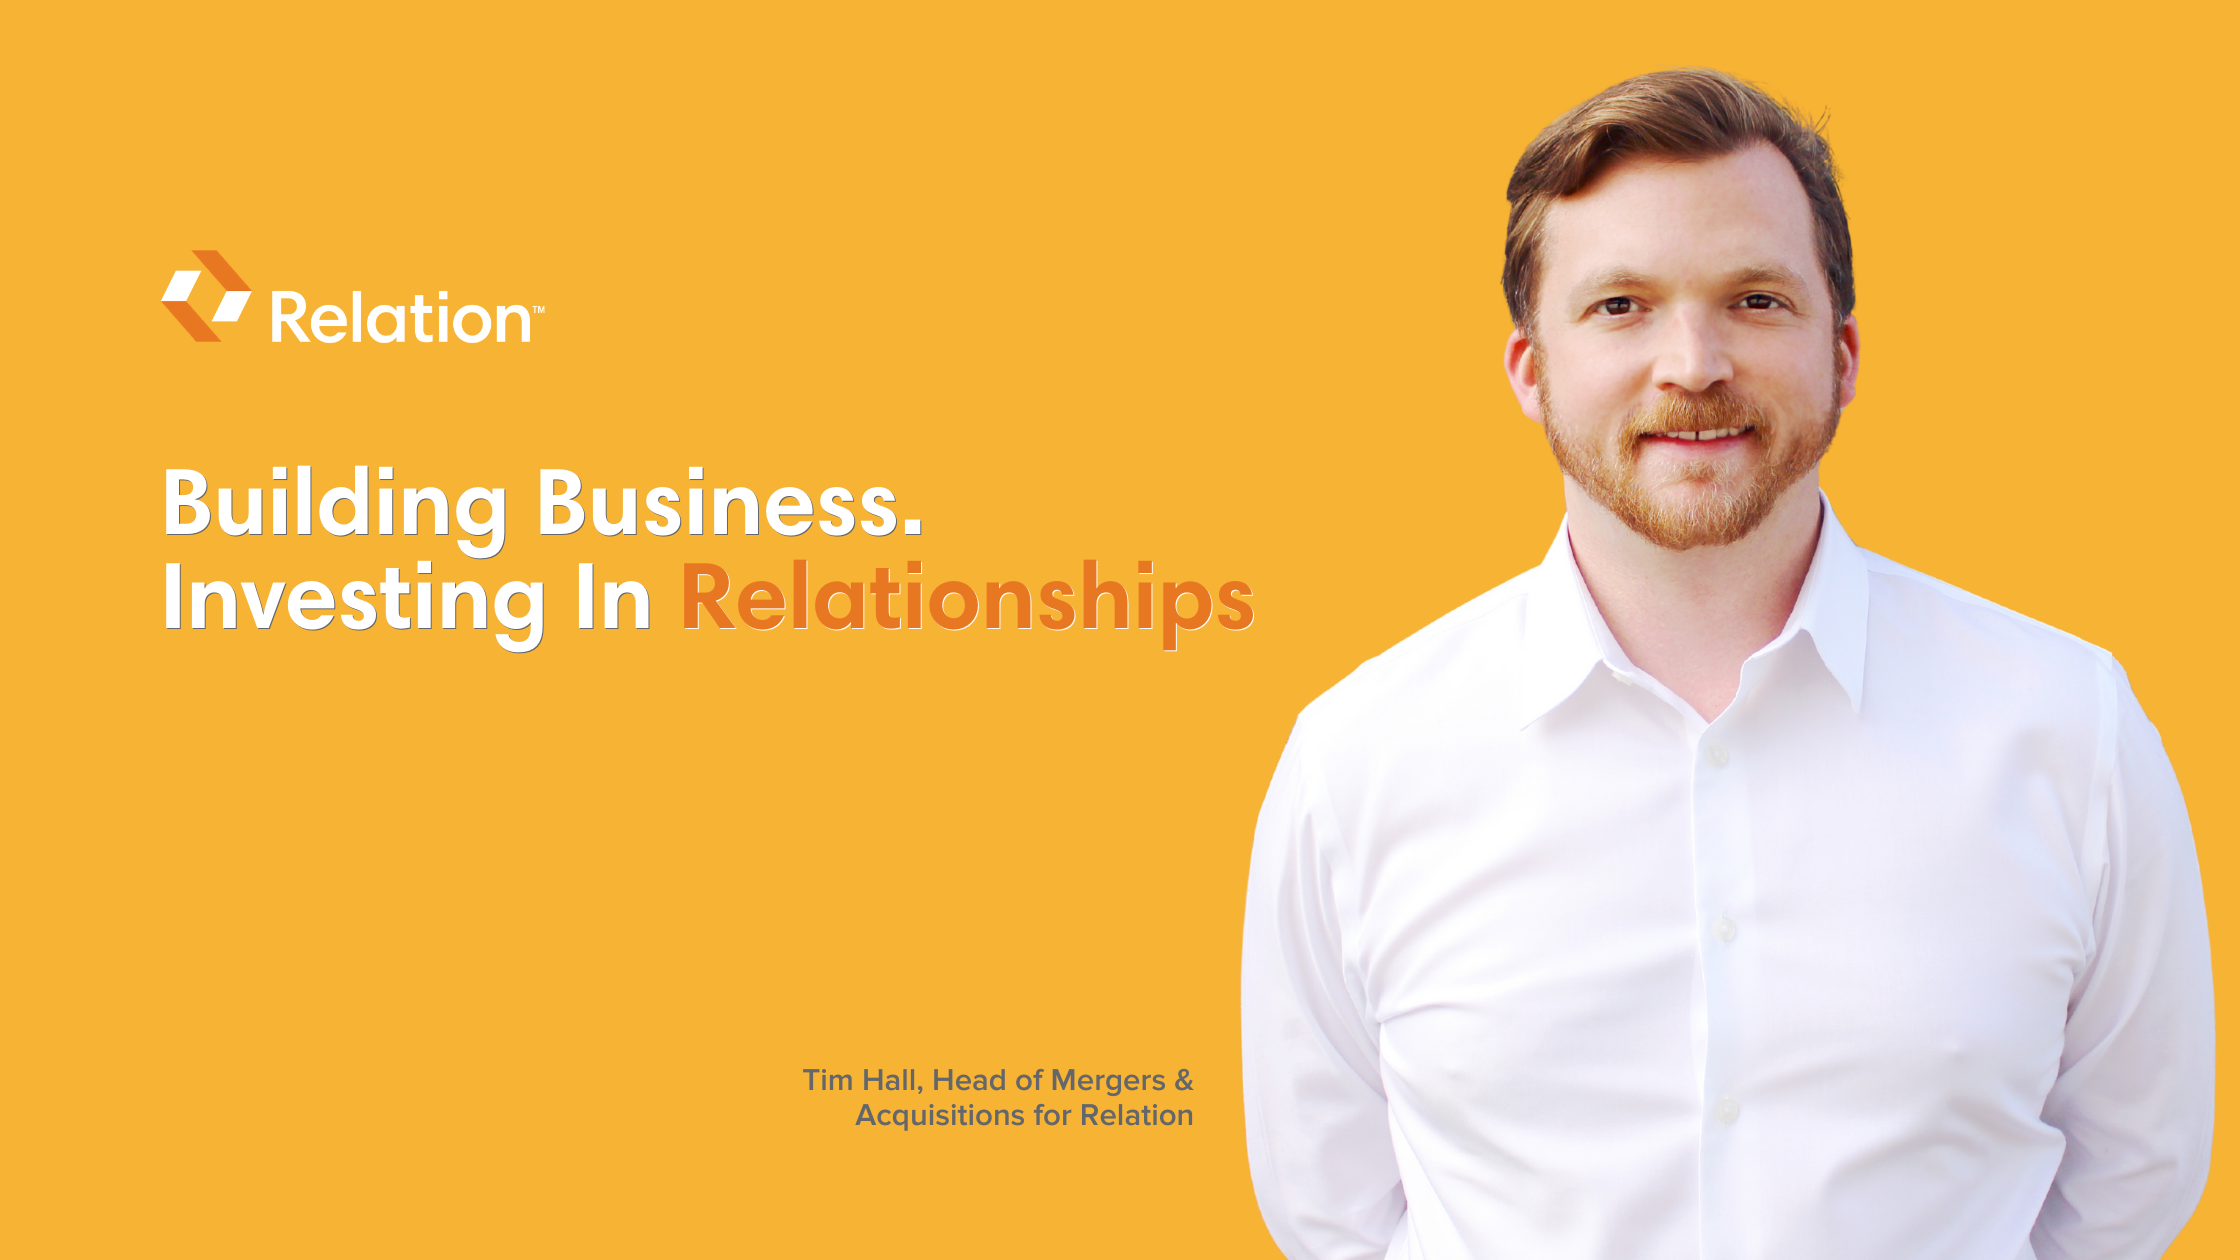 How Relation Builds Business and Invests in Relationships